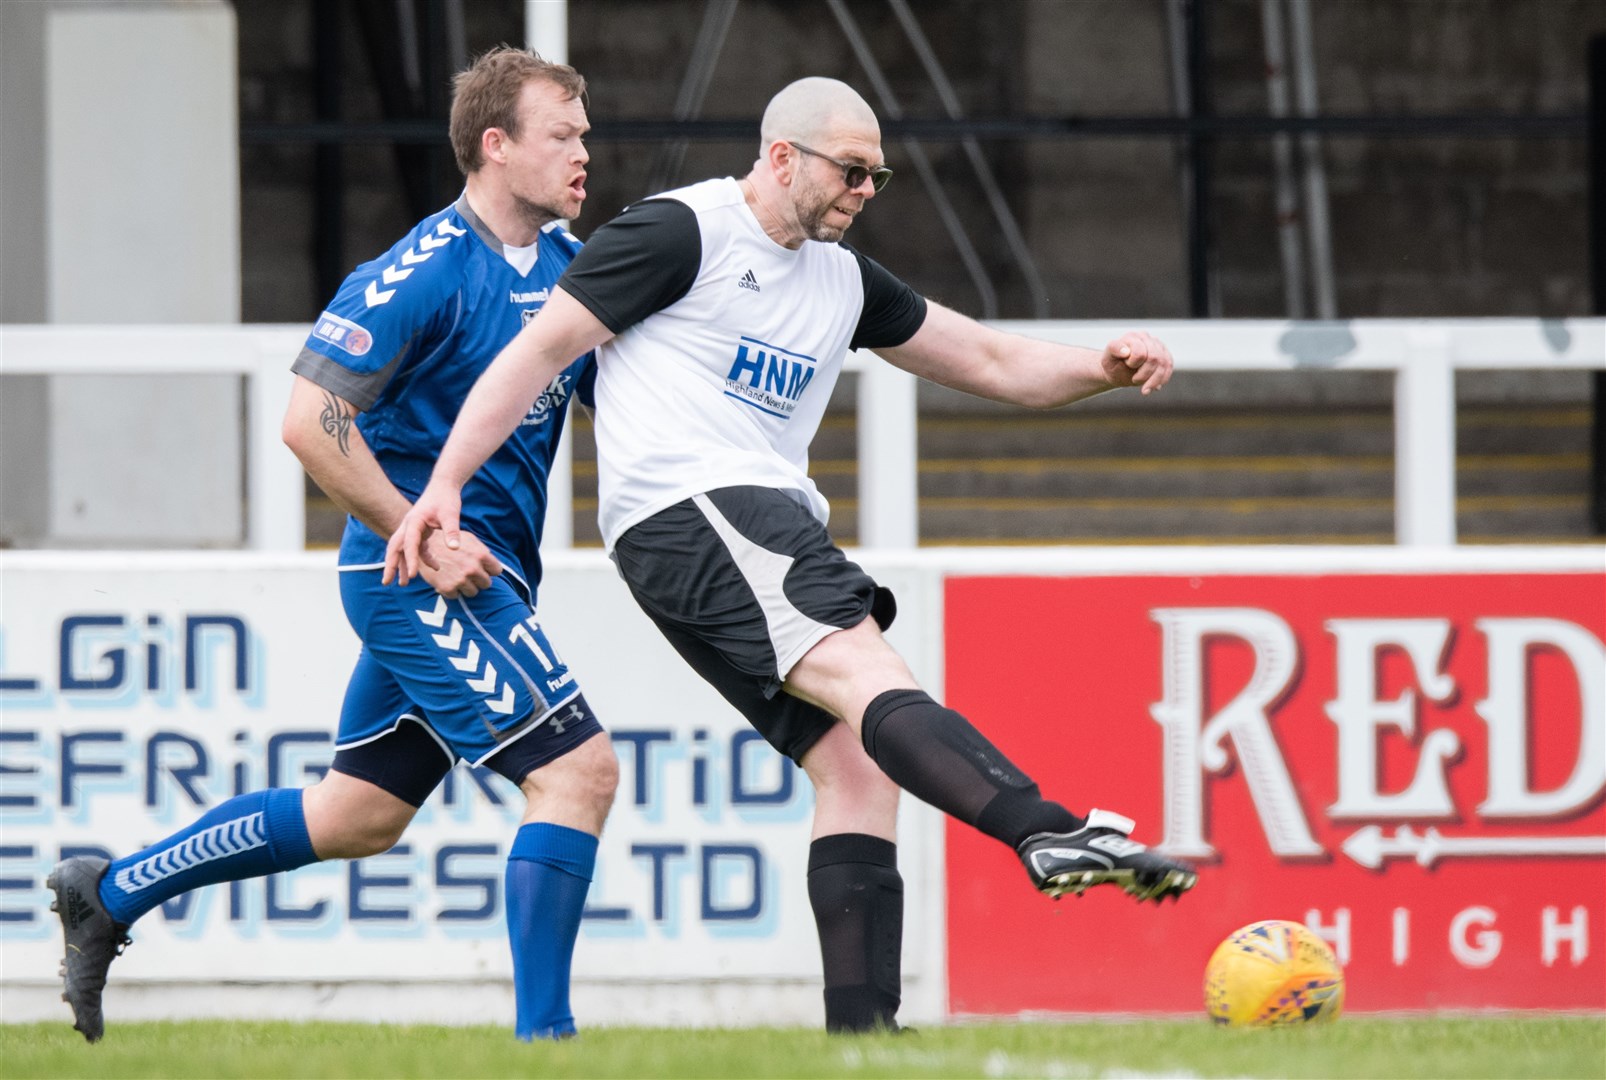 Highland News and Media frontman Andy Dixon gets a shot away. Picture: Daniel Forsyth